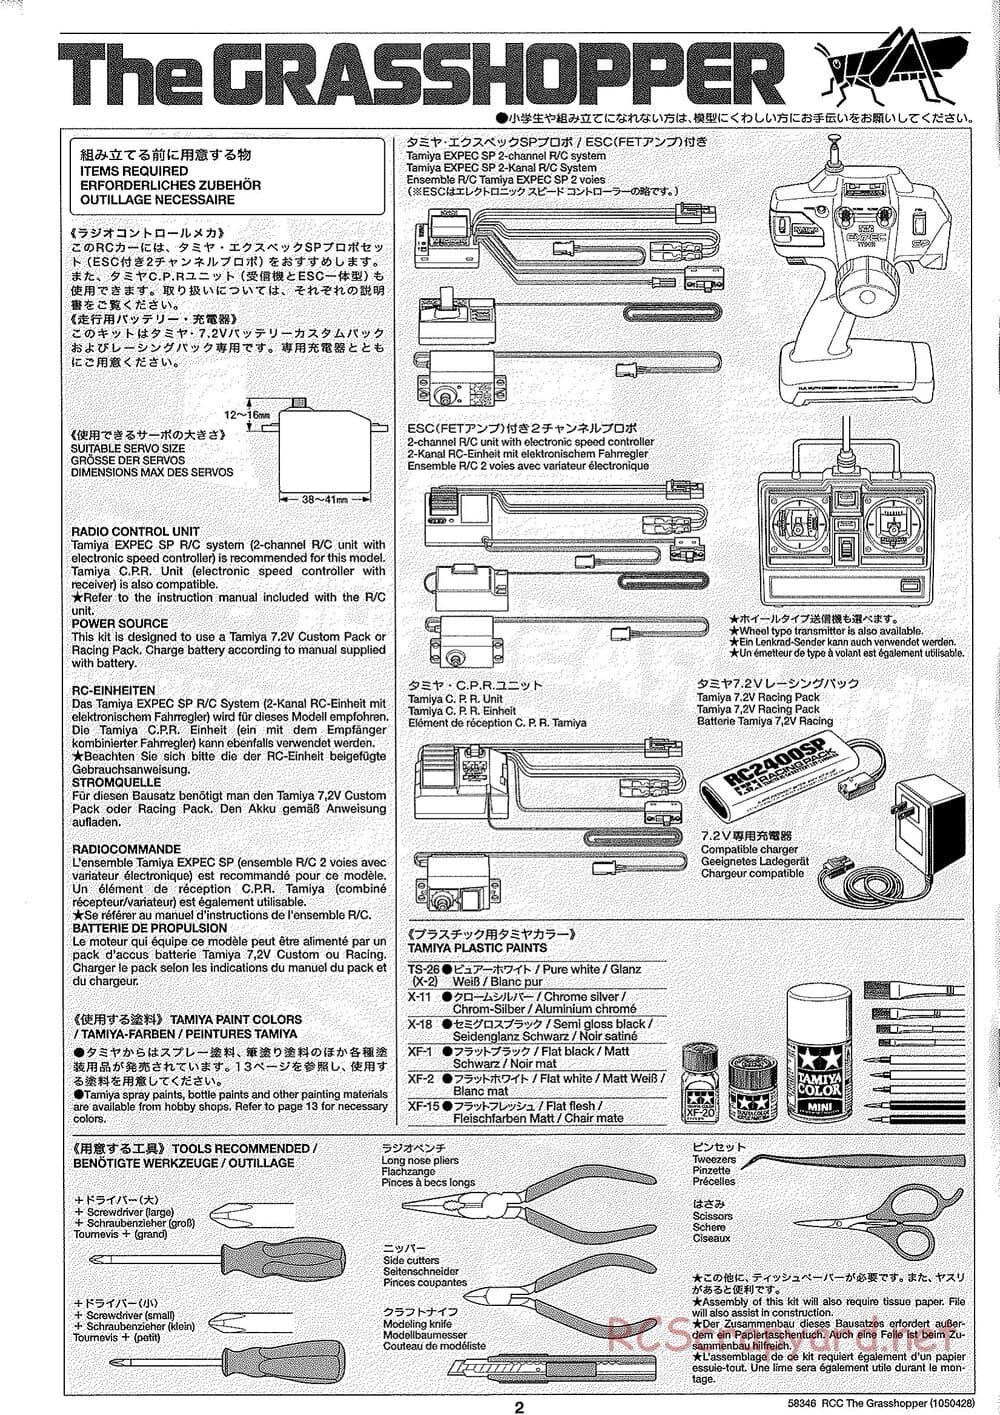 Tamiya - The Grasshopper (2005) - GH Chassis - Manual - Page 2